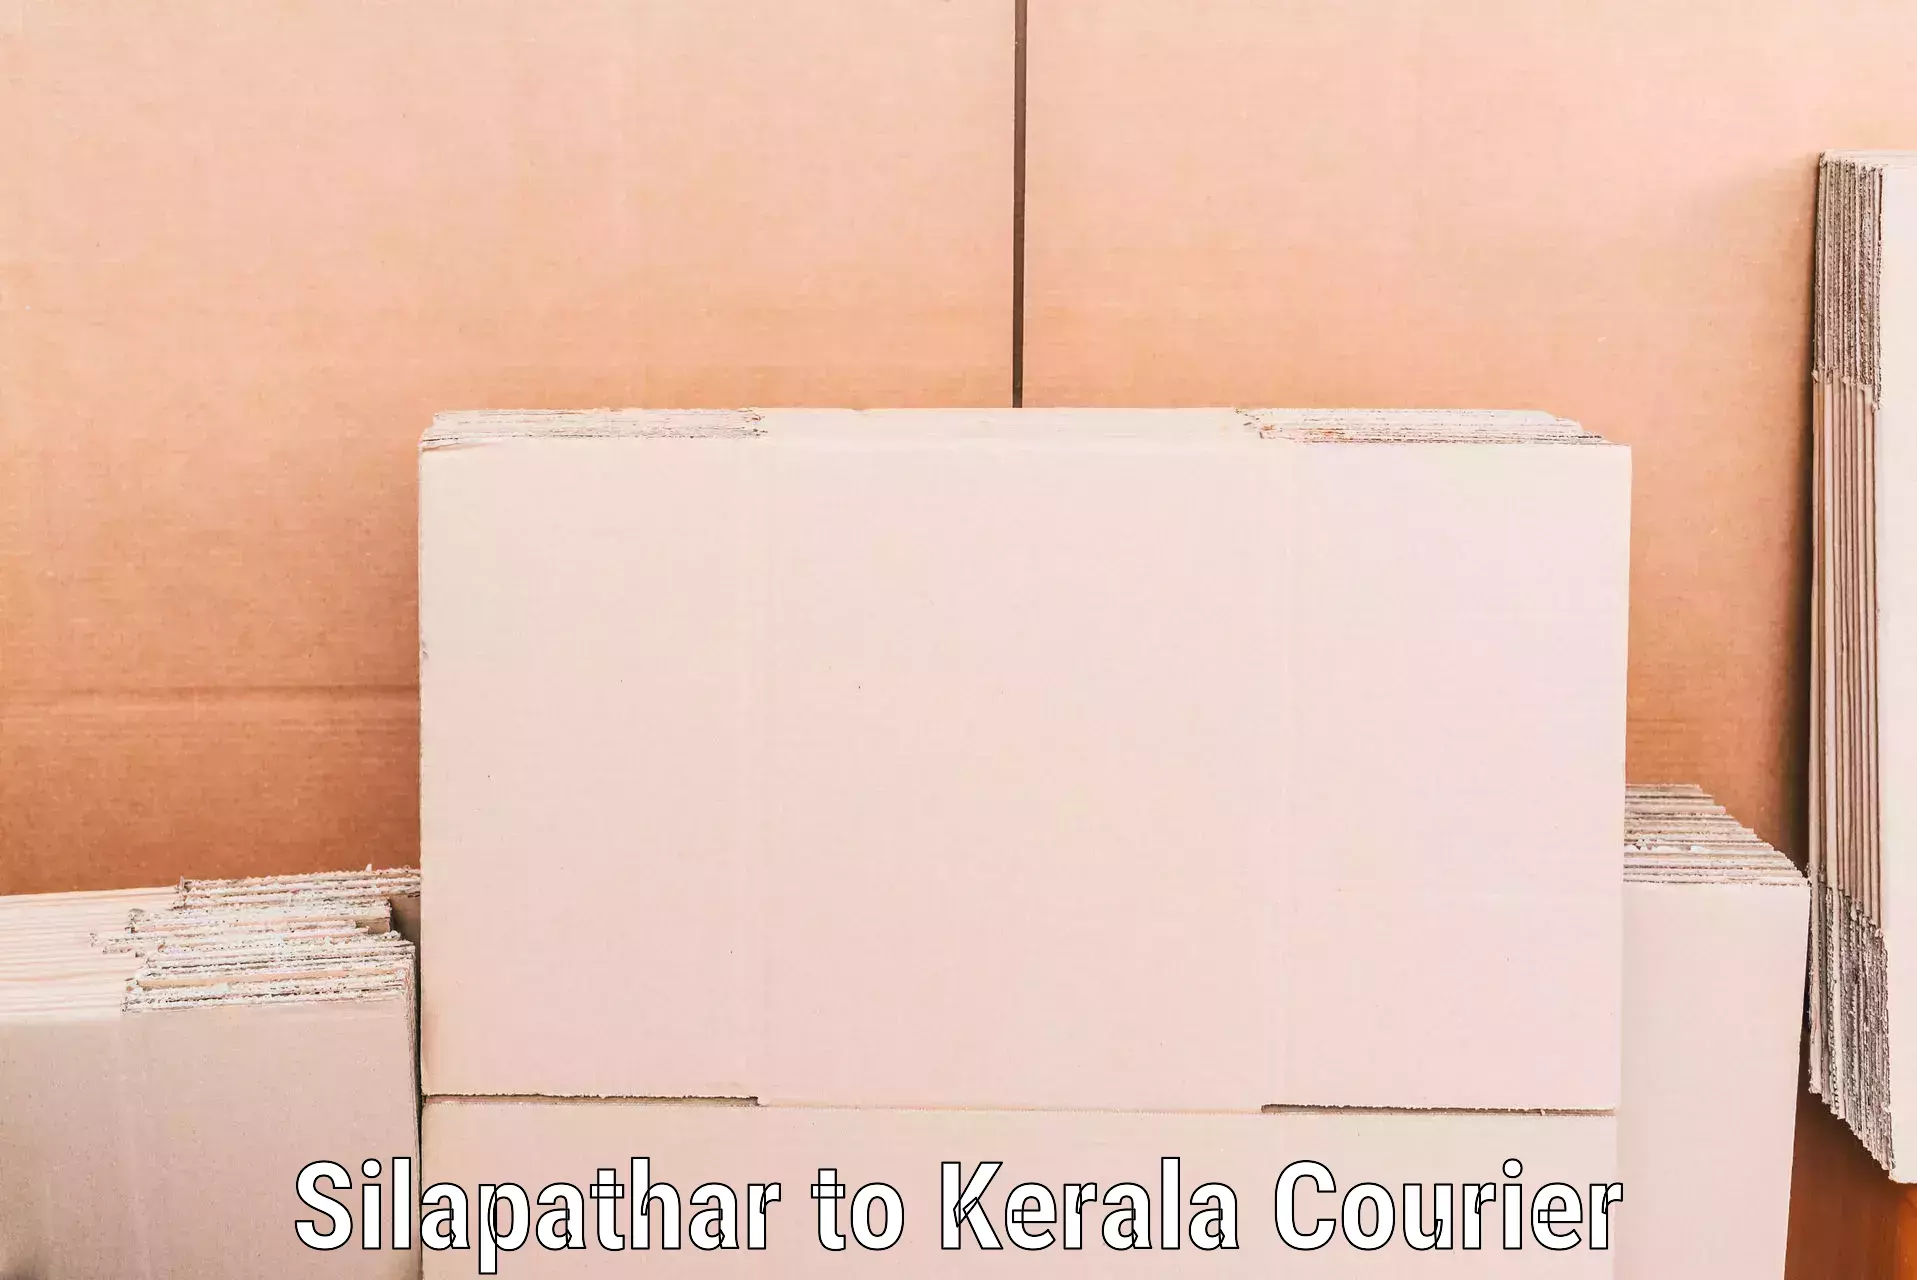 Residential moving experts Silapathar to Koothattukulam